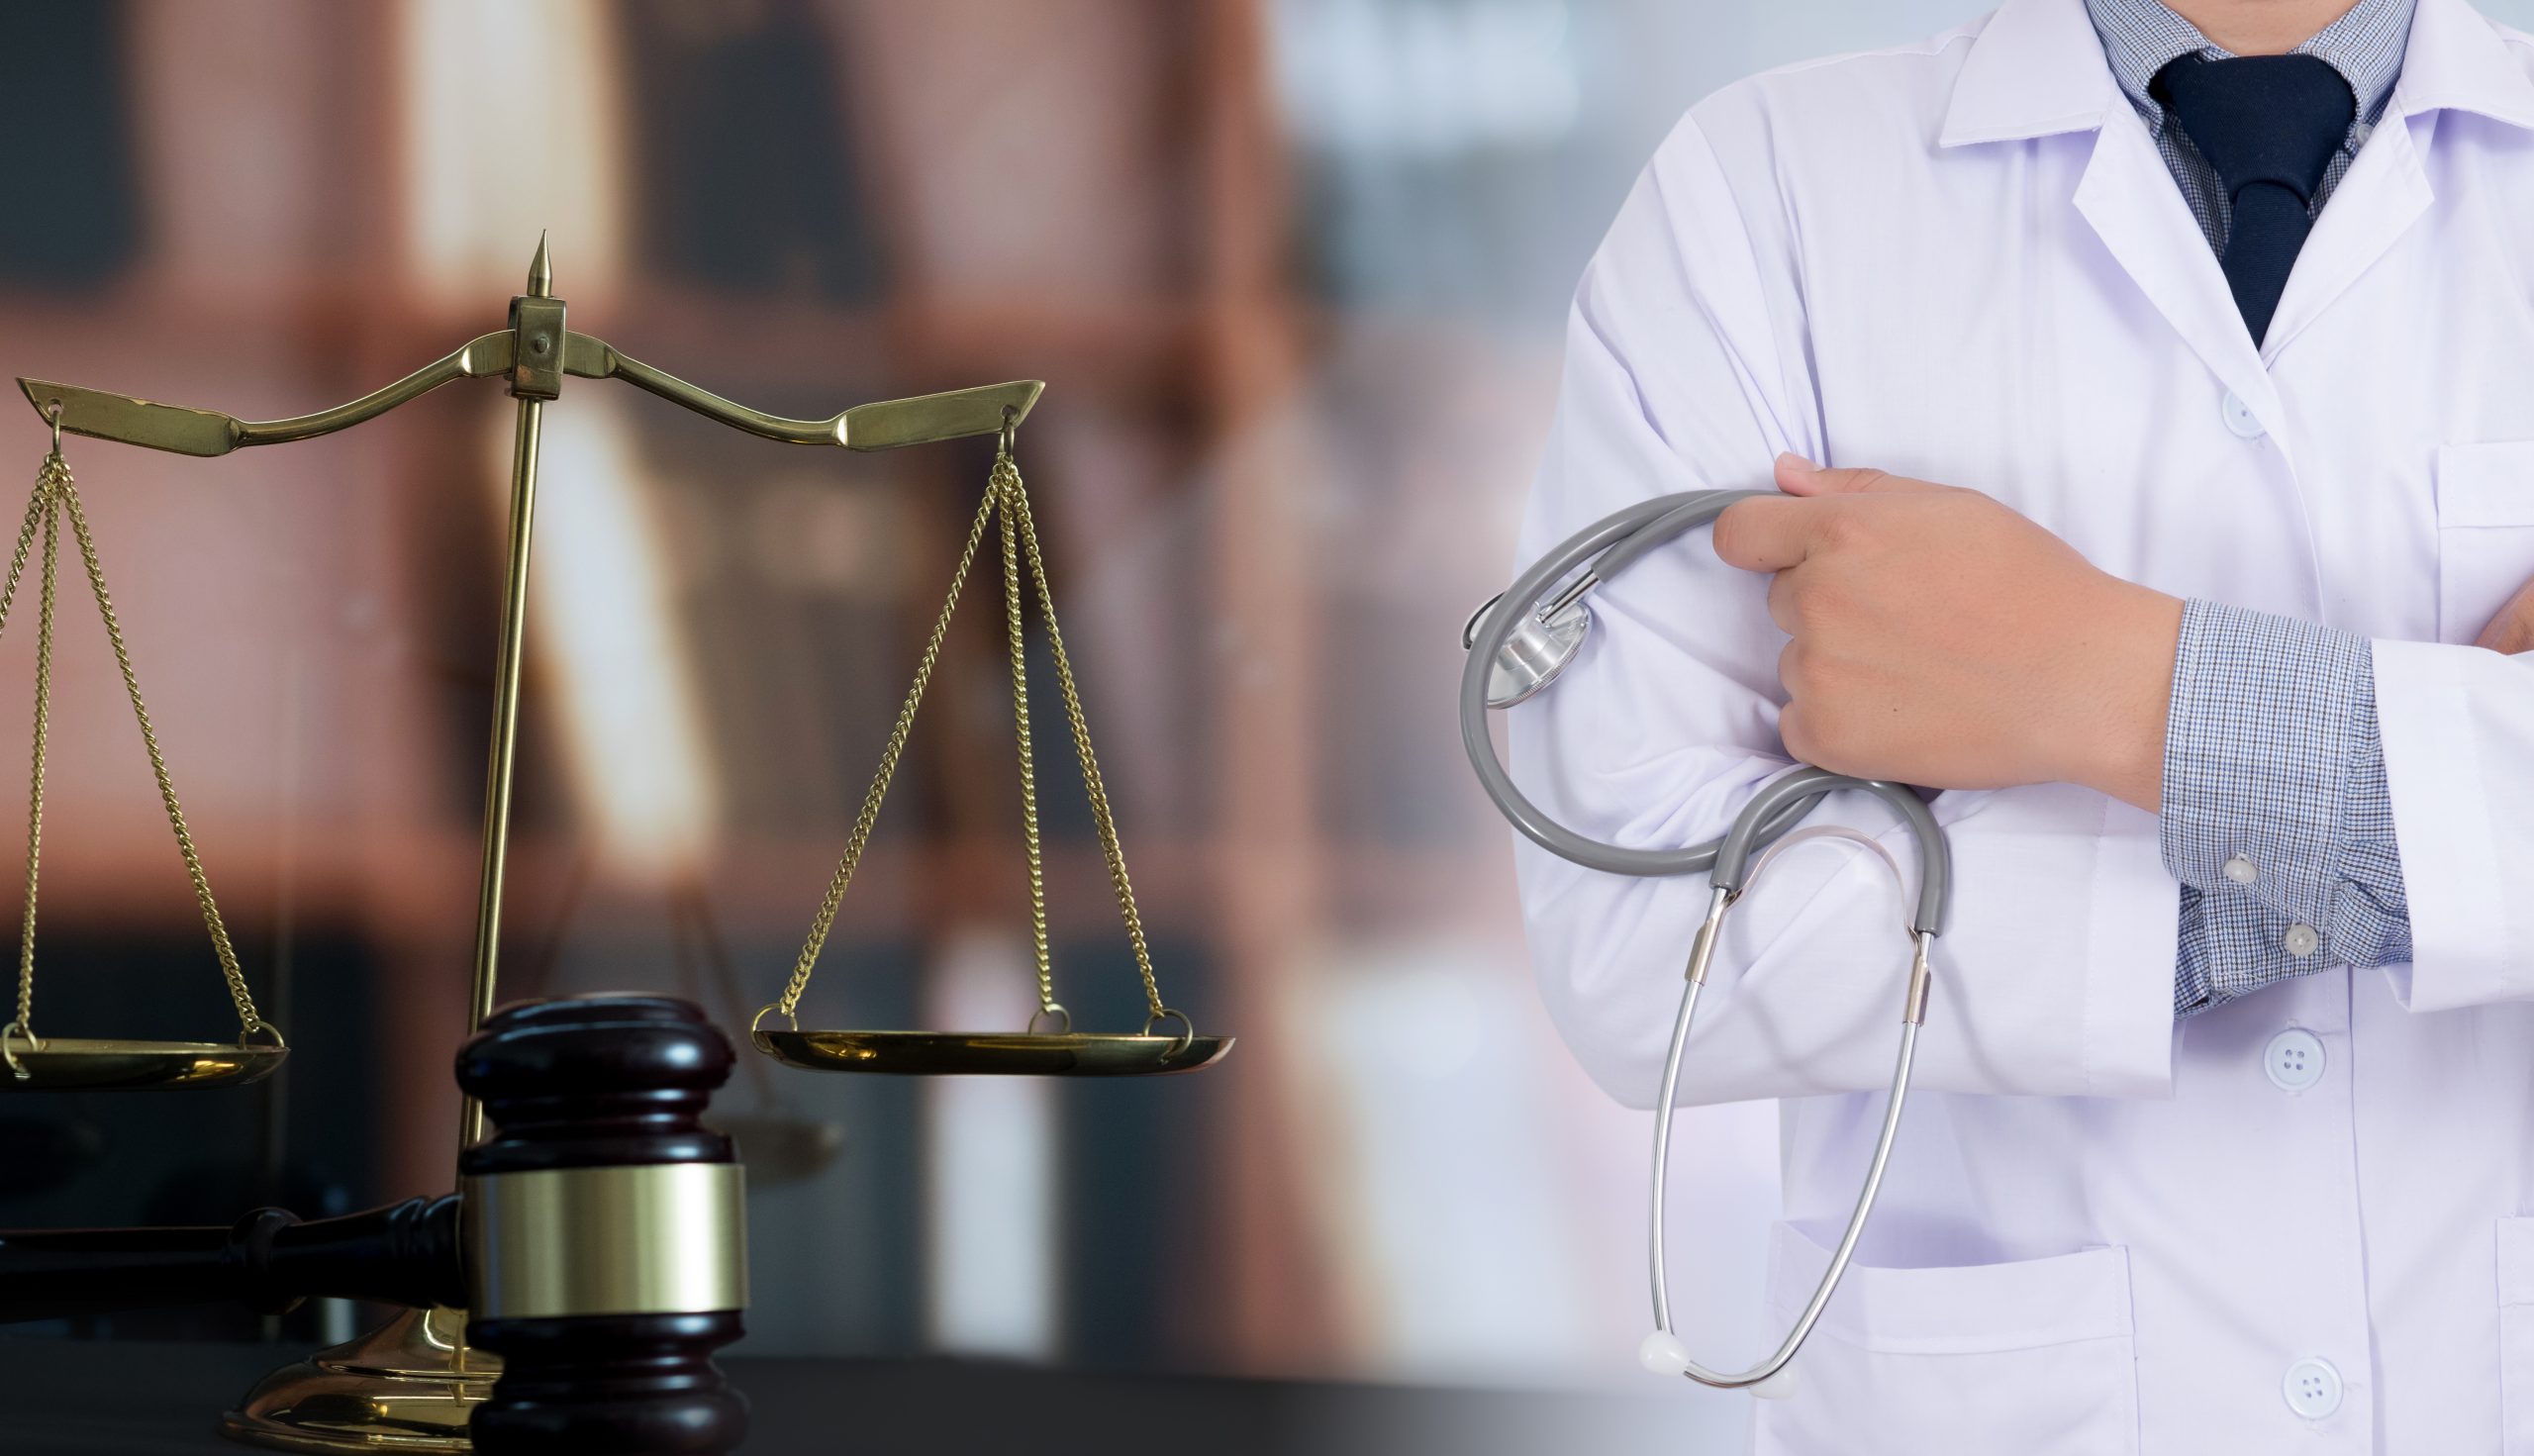 scales of justice and doctor with stethoscope. Severe mental illness treatment options overview